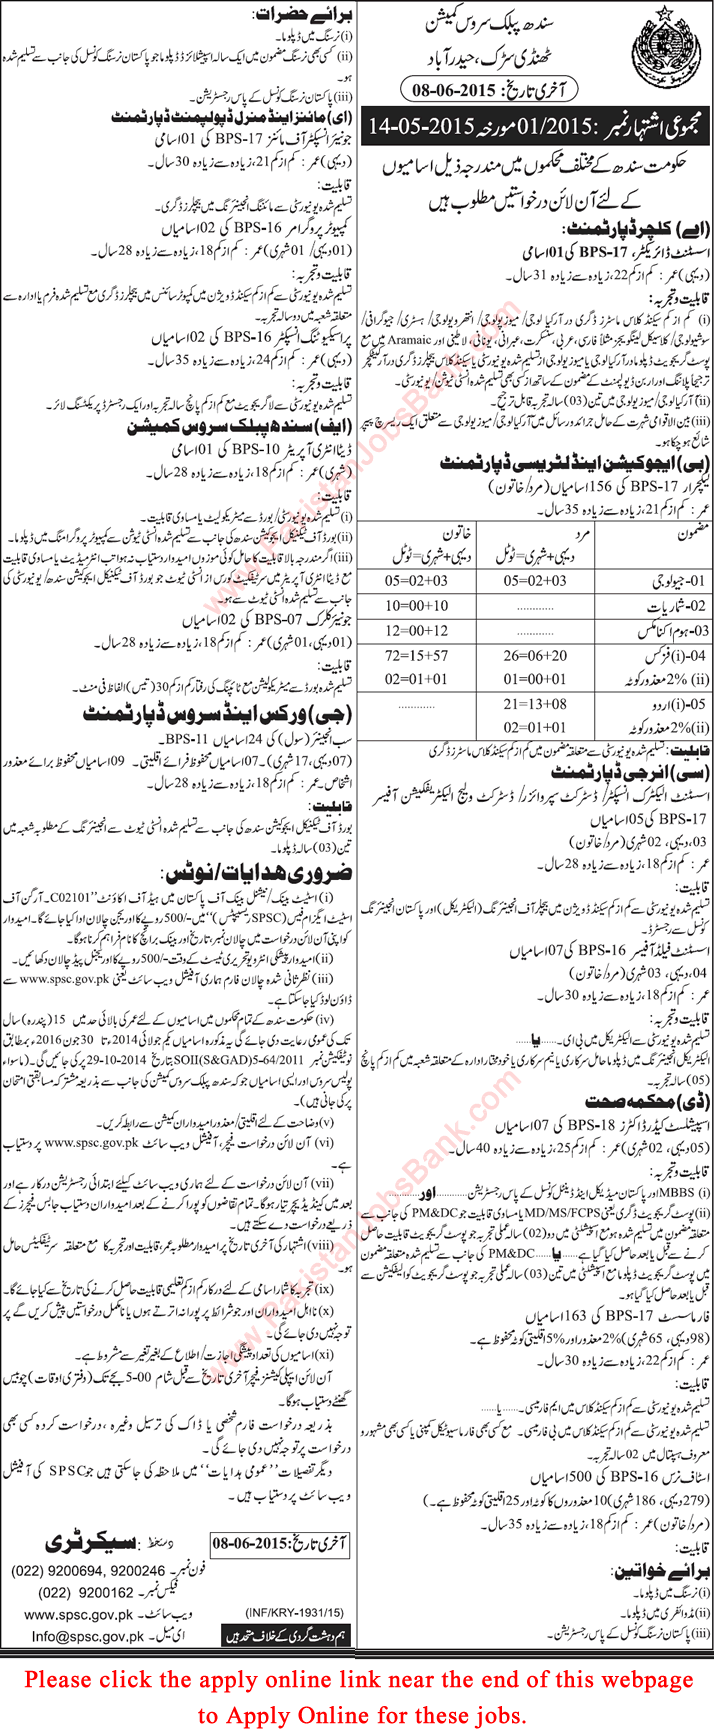 Sindh Public Service Commission Jobs 2015 May Apply Online Consolidated Advertisement No. 01/2015 (1/2015)